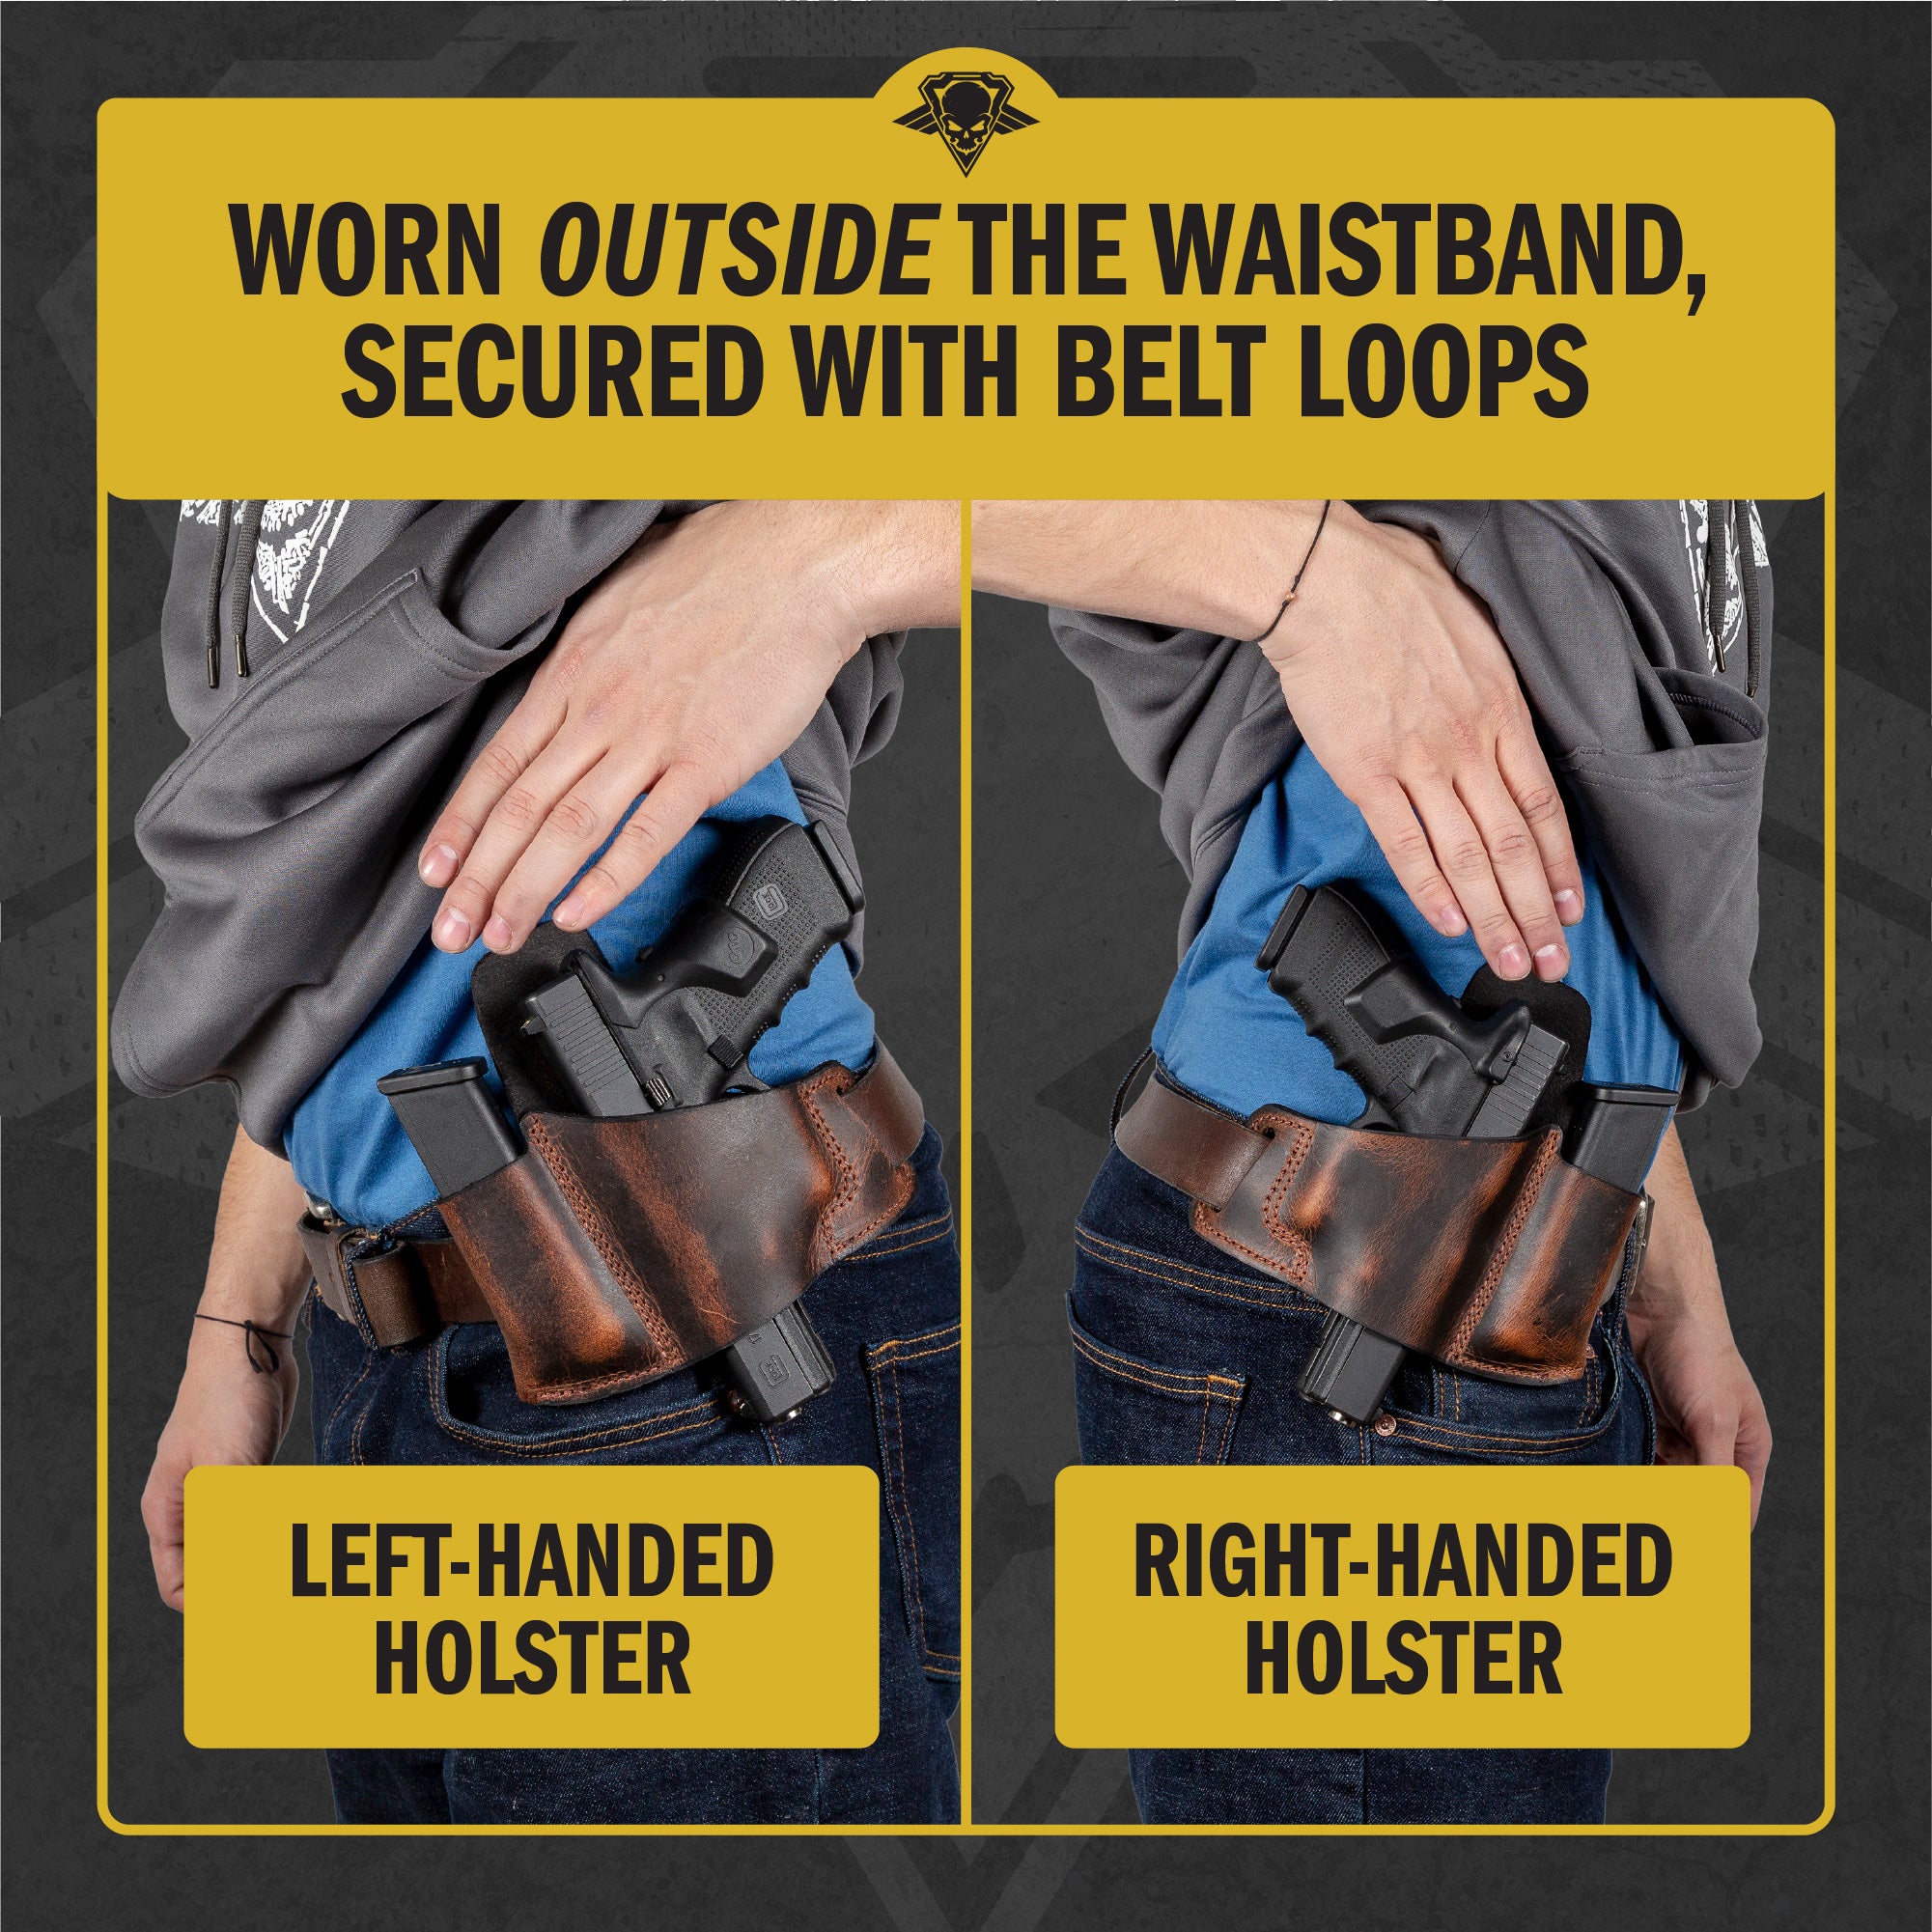 Combo Open Top Multi-Fit Belt Holster C and Mag 1